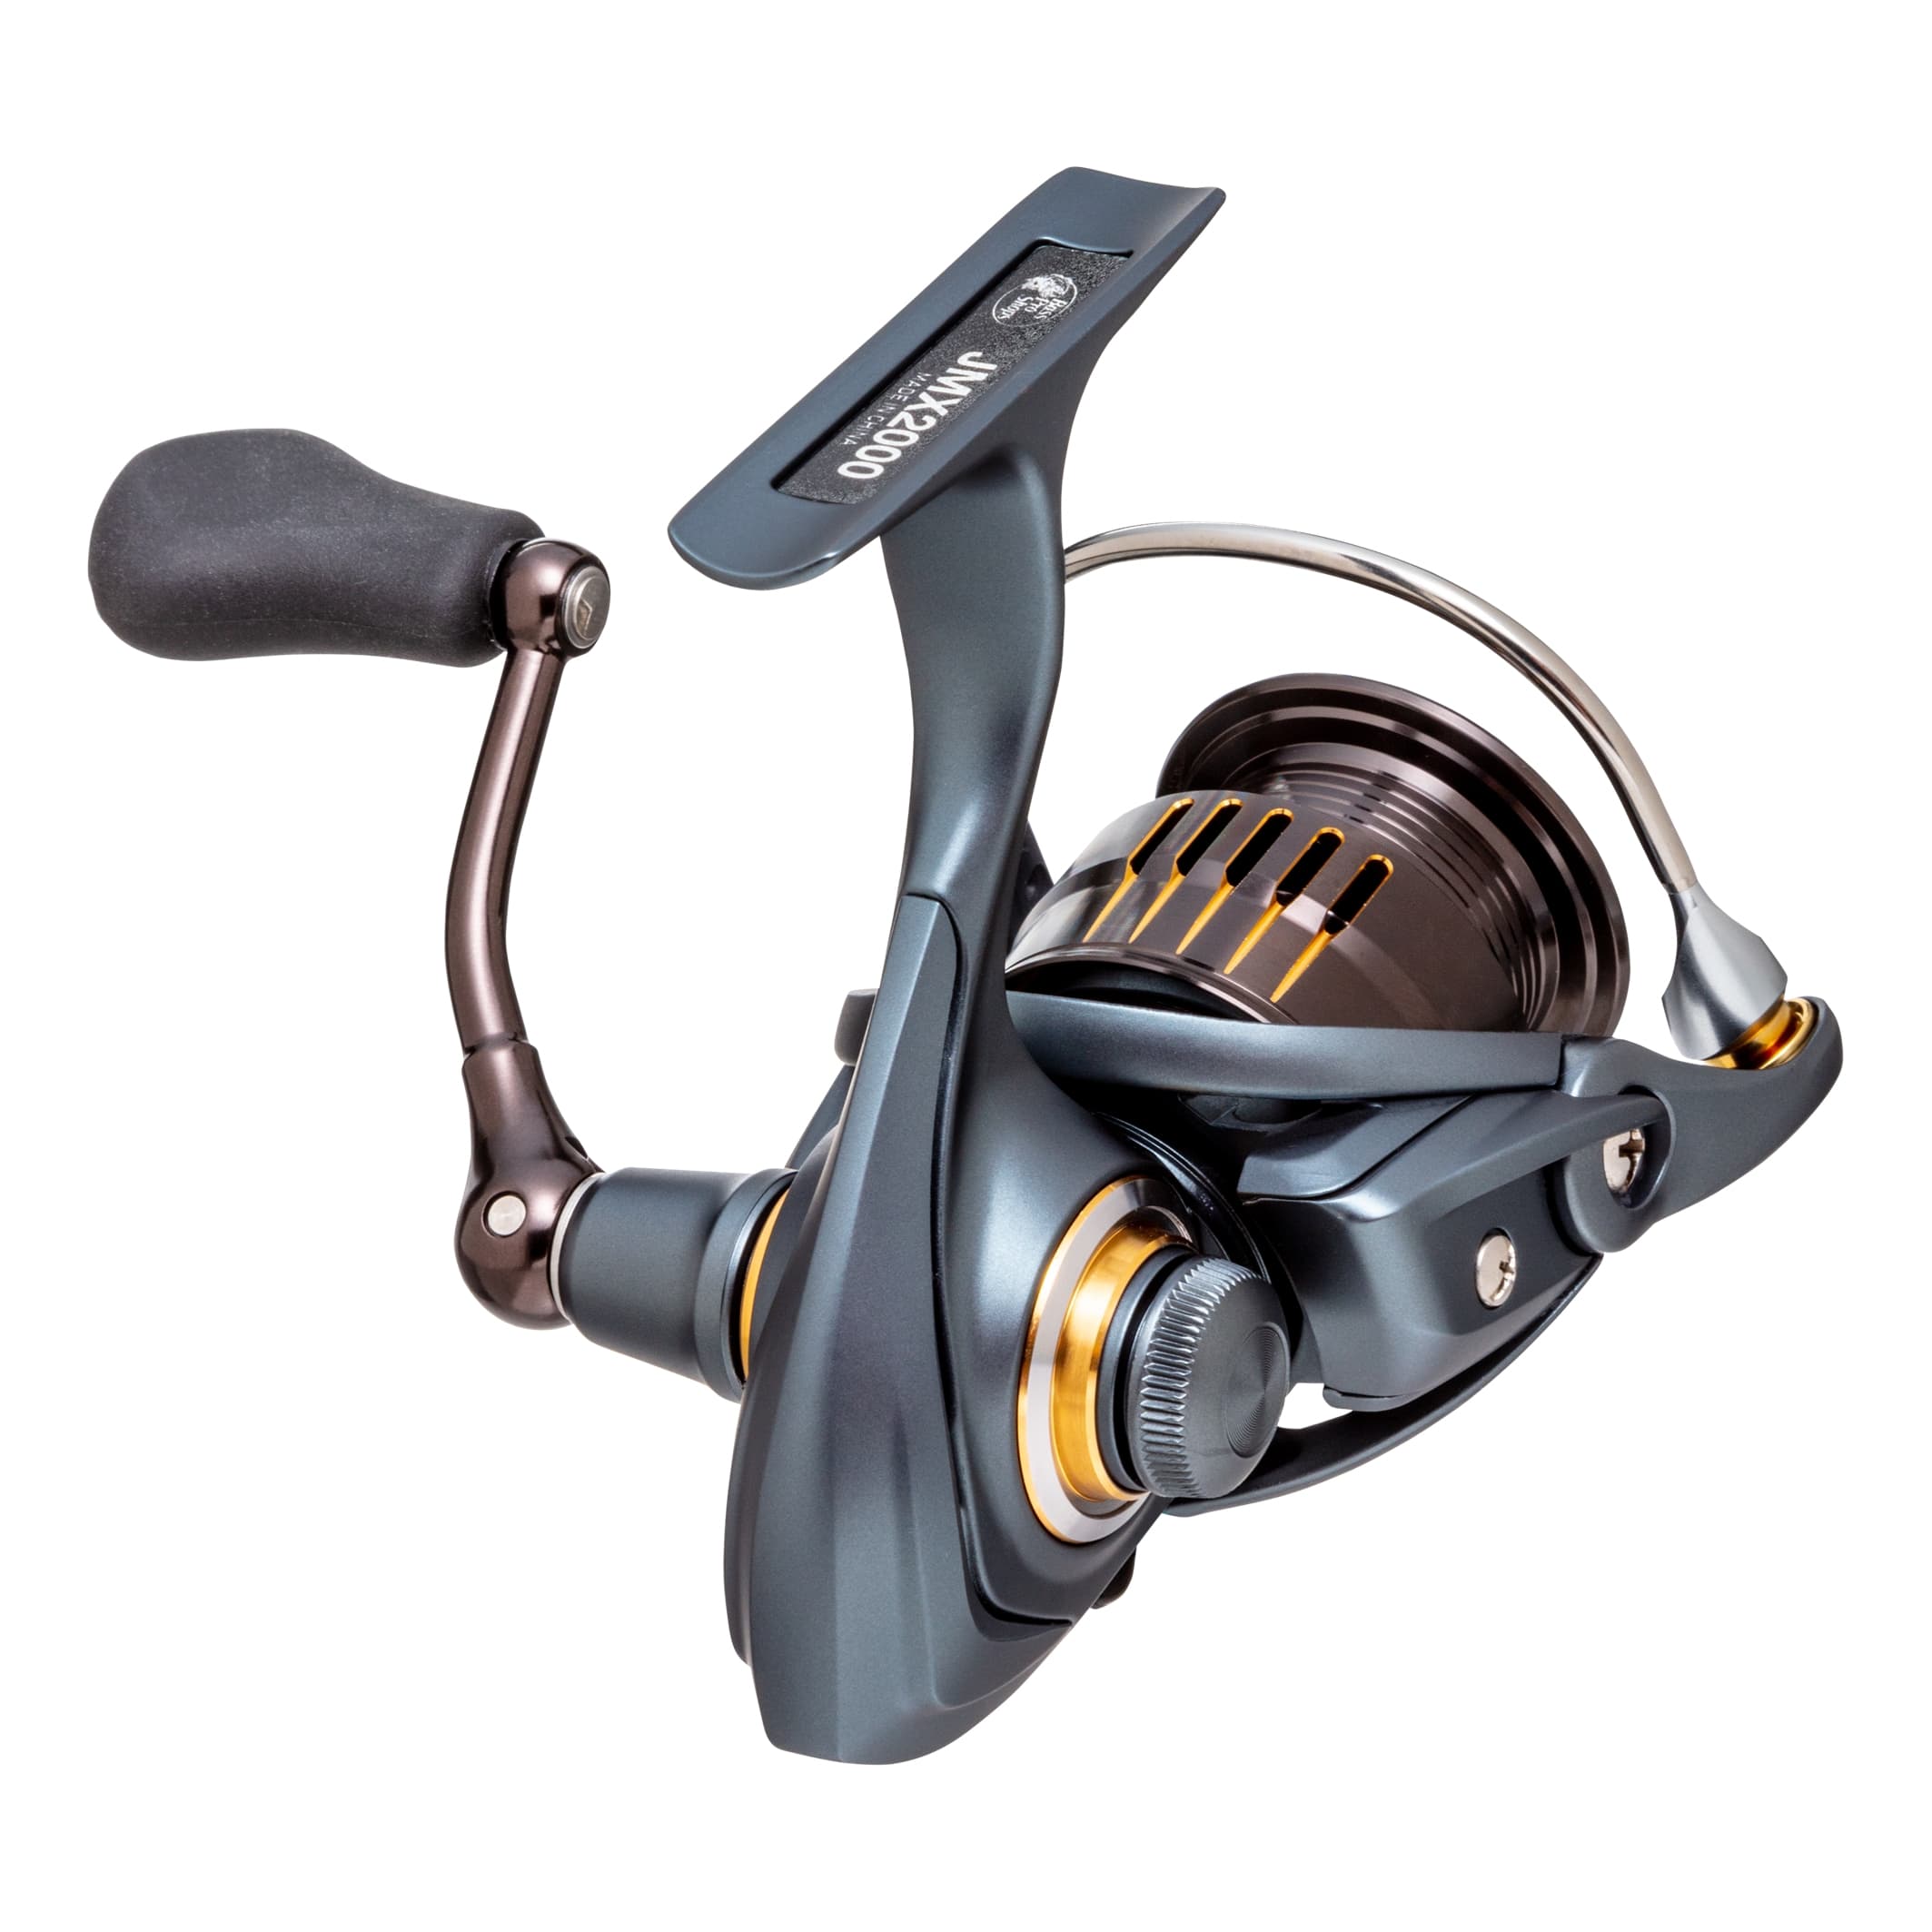 Bass Pro Shops® Johnny Morris® Signature Series Spinning Reel - alternate view